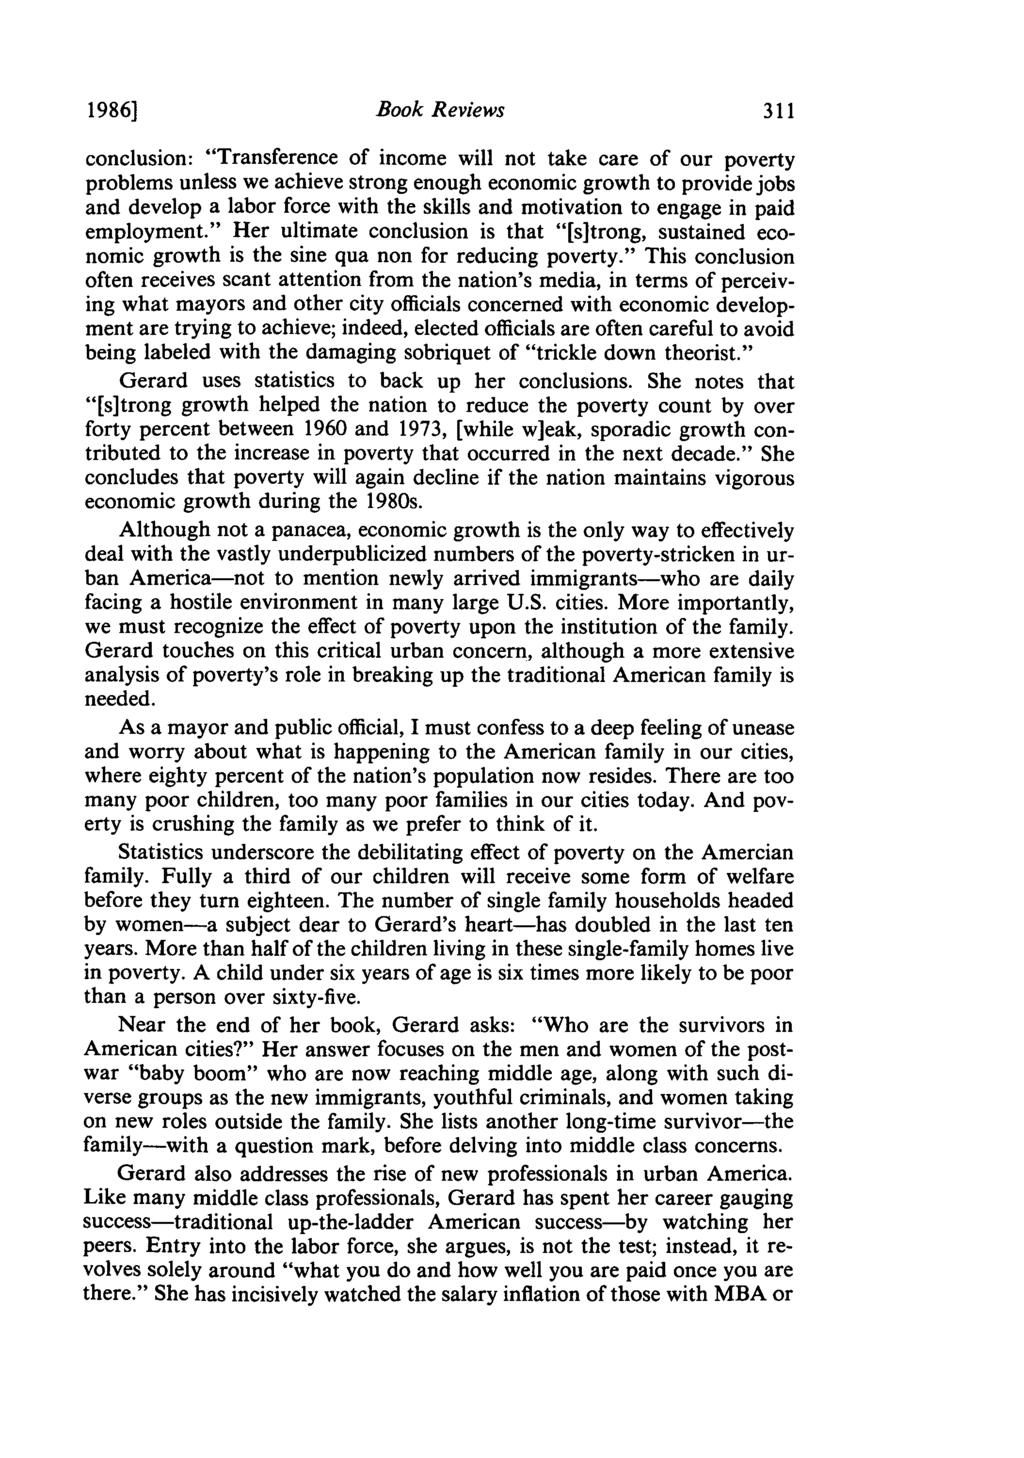 1986] Book Reviews conclusion: "Transference of income will not take care of our poverty problems unless we achieve strong enough economic growth to provide jobs and develop a labor force with the